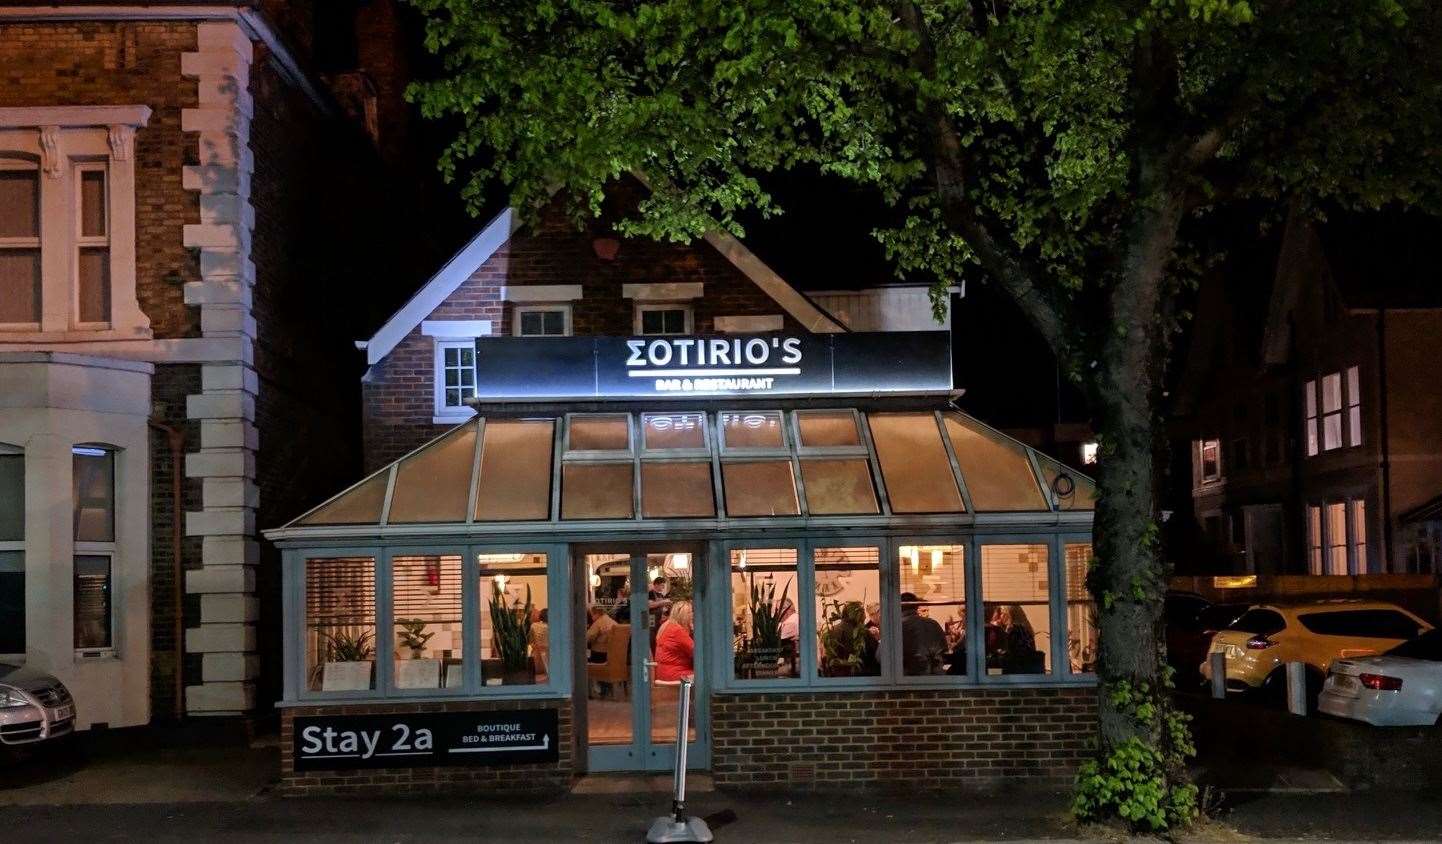 Sotirios Bar and Restaurant in Folkestone has been named as one of the best restaurants in the country